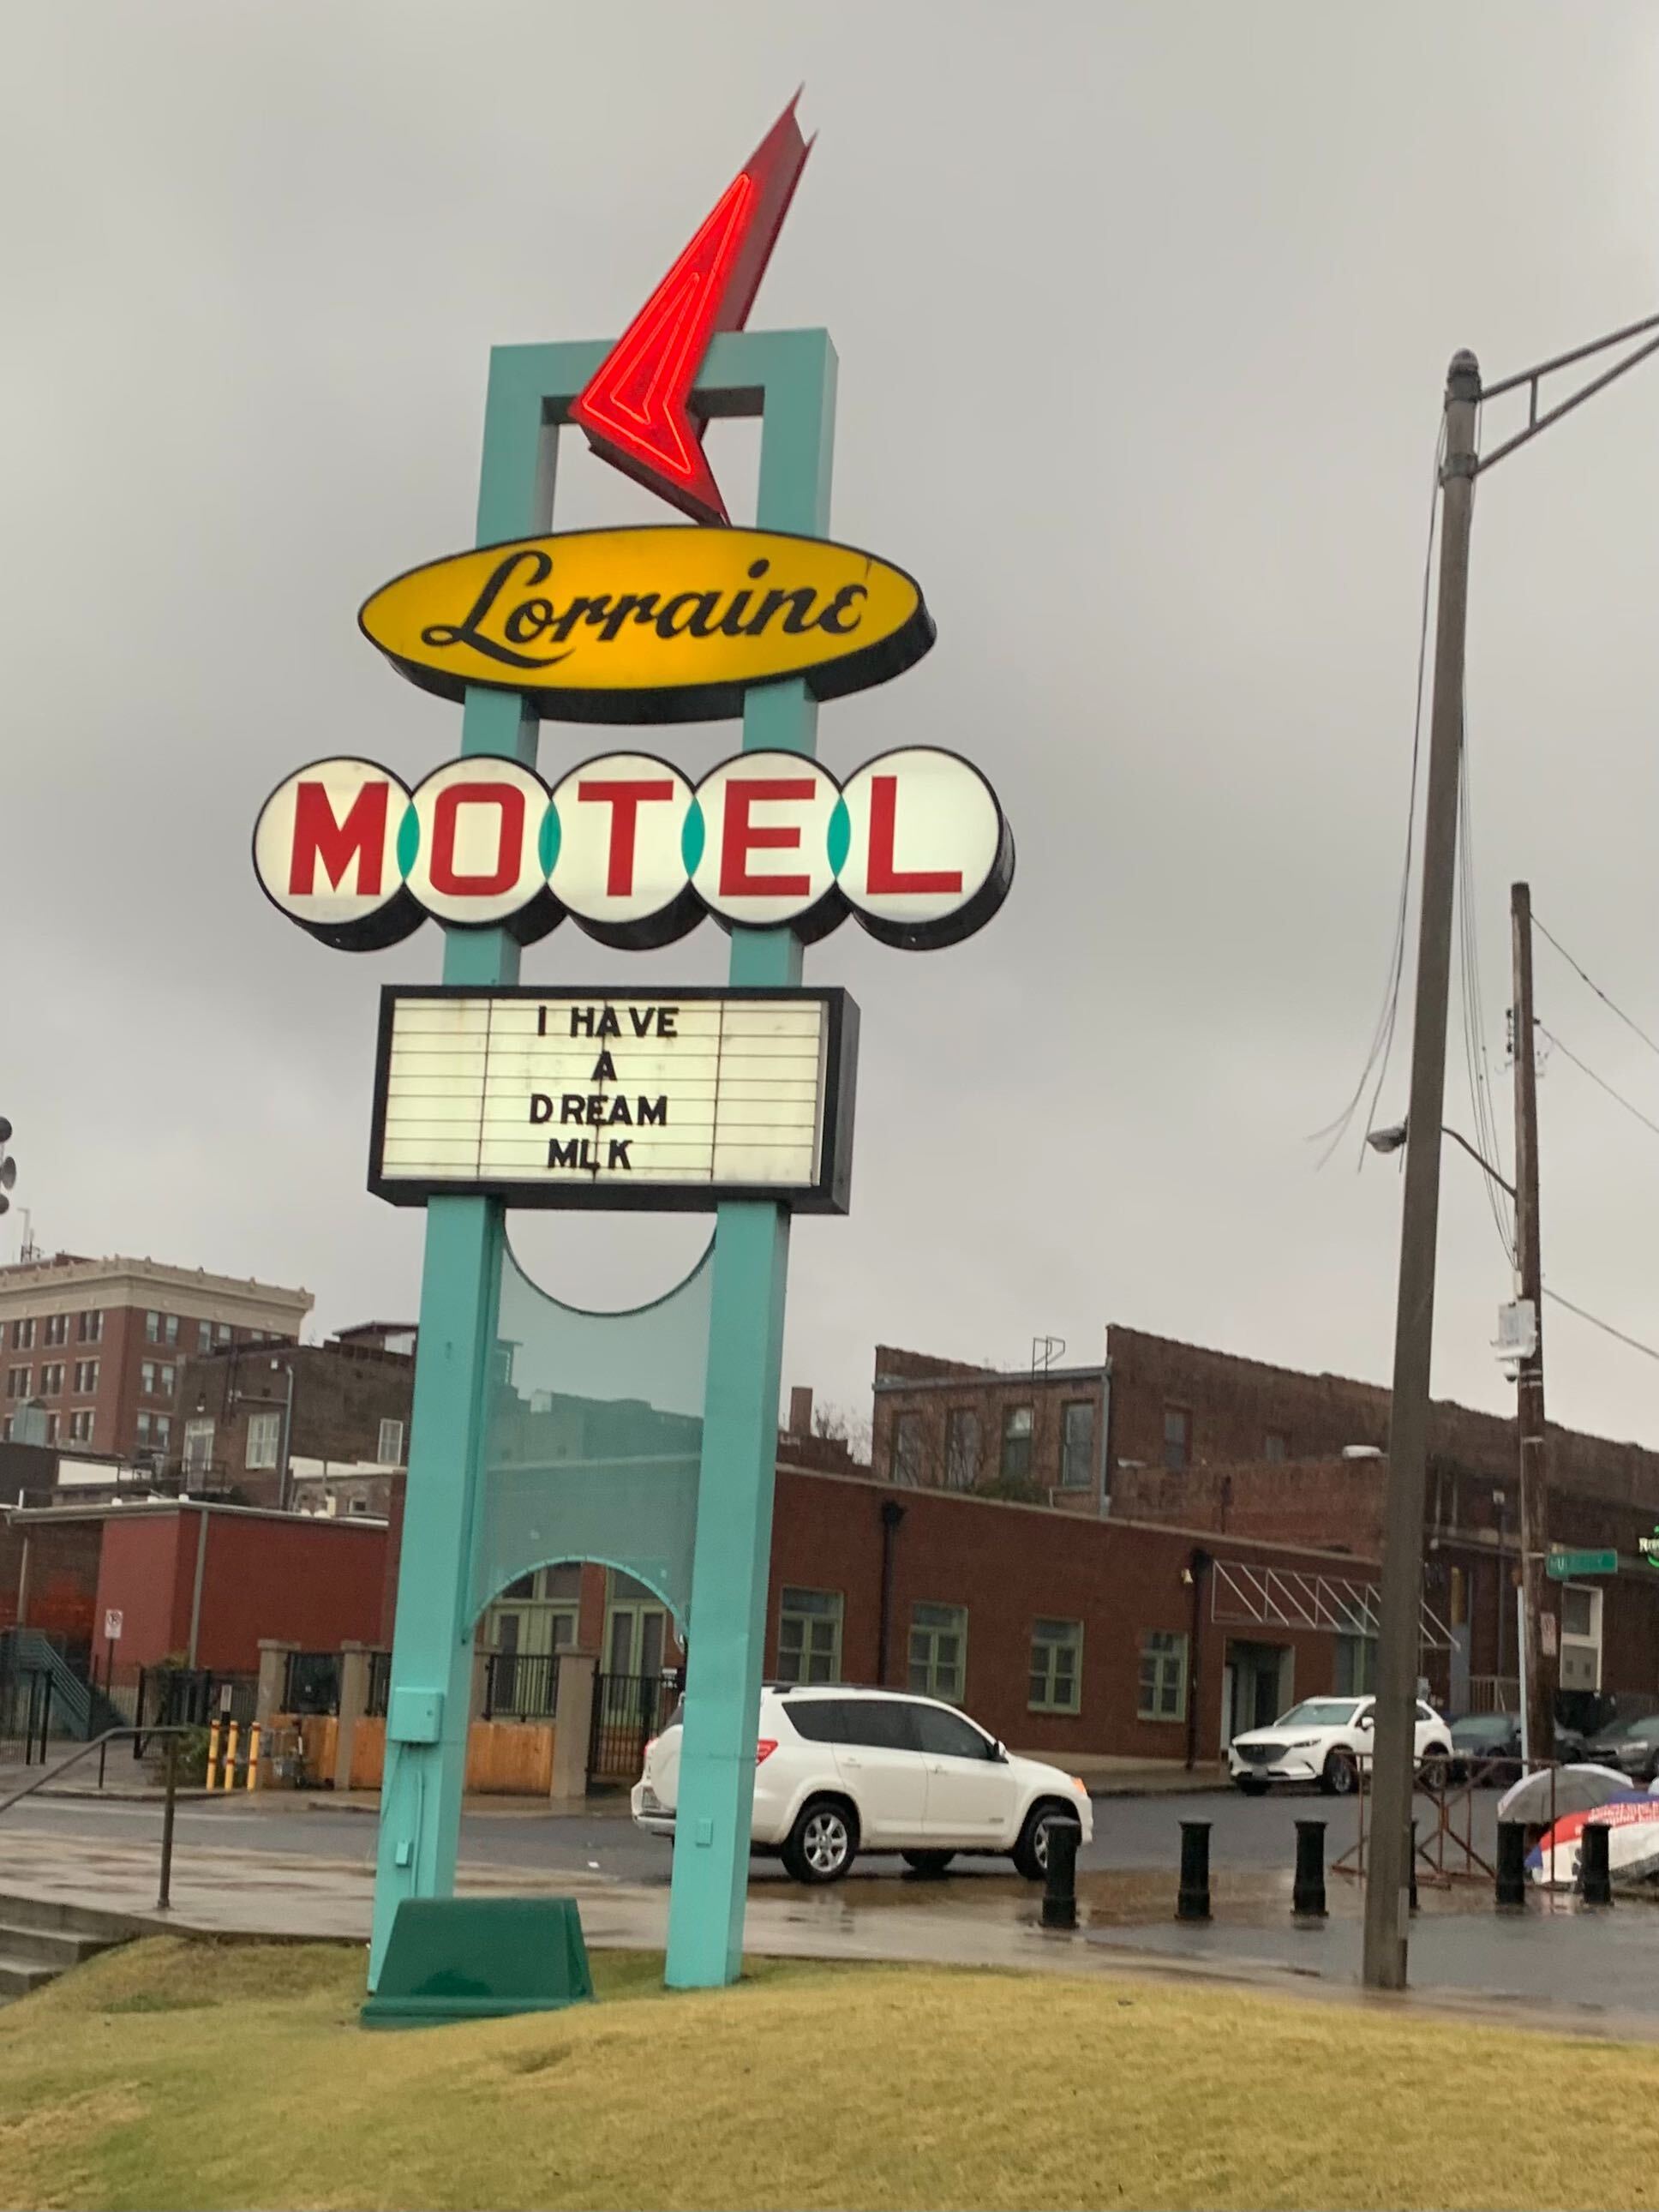 A photo on a rainy day showing the sign for the Lorraine Motel, which has a rectangular turquoise frame topped with a stylized red neon arrow. The text for Lorraine is in a cursive script inside a yellow field underneath the arrow, with "motel" underneath still in red block letters inside white circles. A board below the letters reads "I have a dream — MLK." 